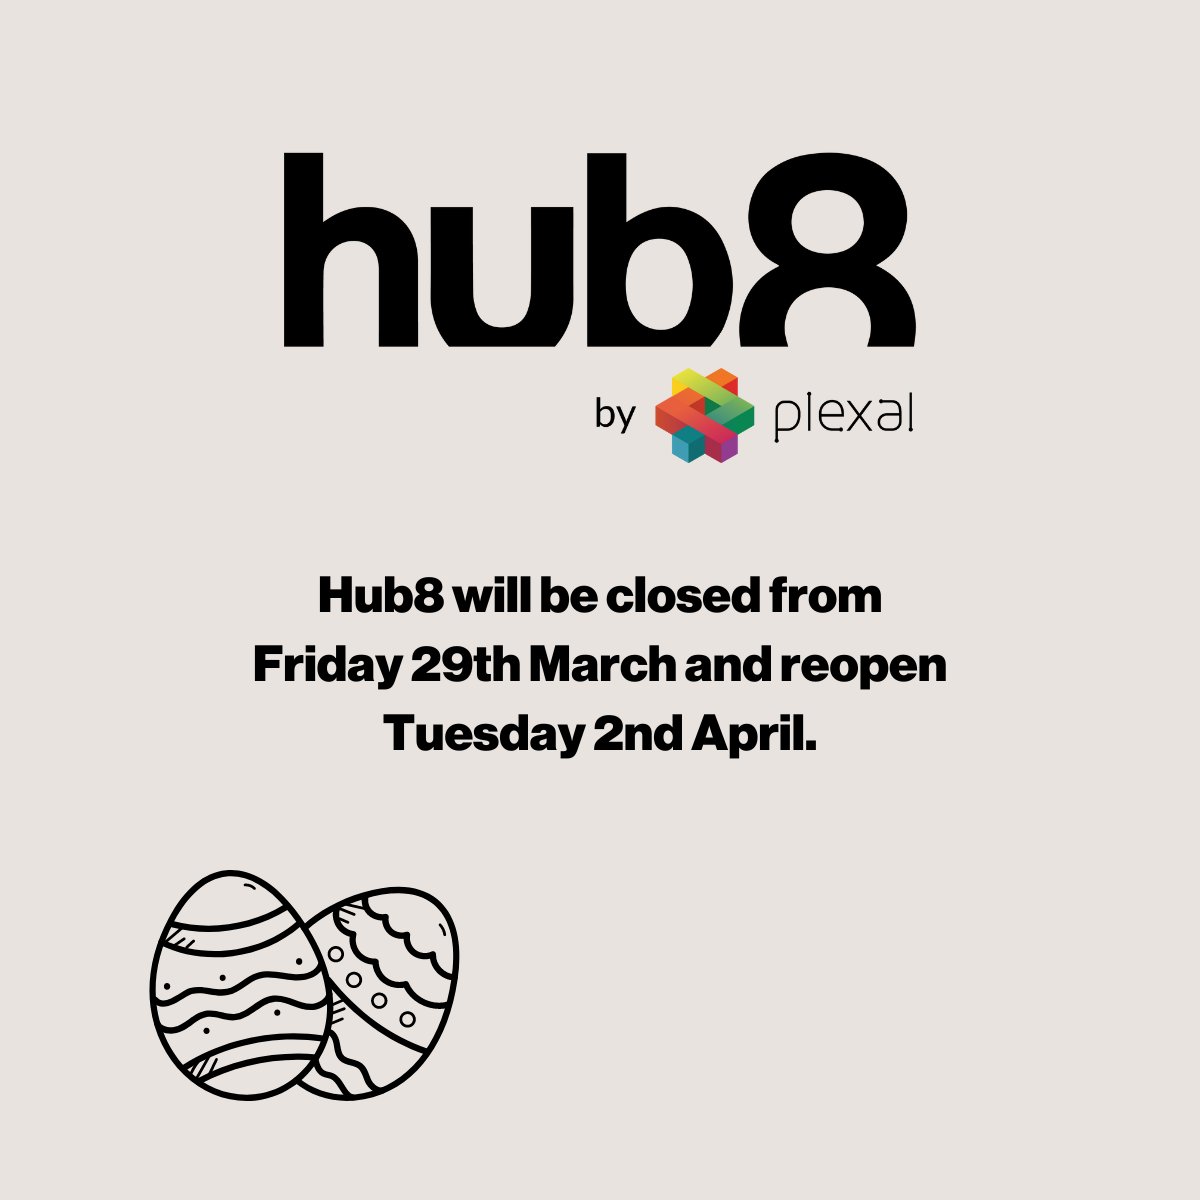 Hub8 will be closed over the Easter weekend, including Good Friday and Easter Monday. We'll reopen on Tuesday the 2nd of April. We hope you all have a good Easter break and look forward to welcoming you back next week! #EasterClosure #HolidayHours